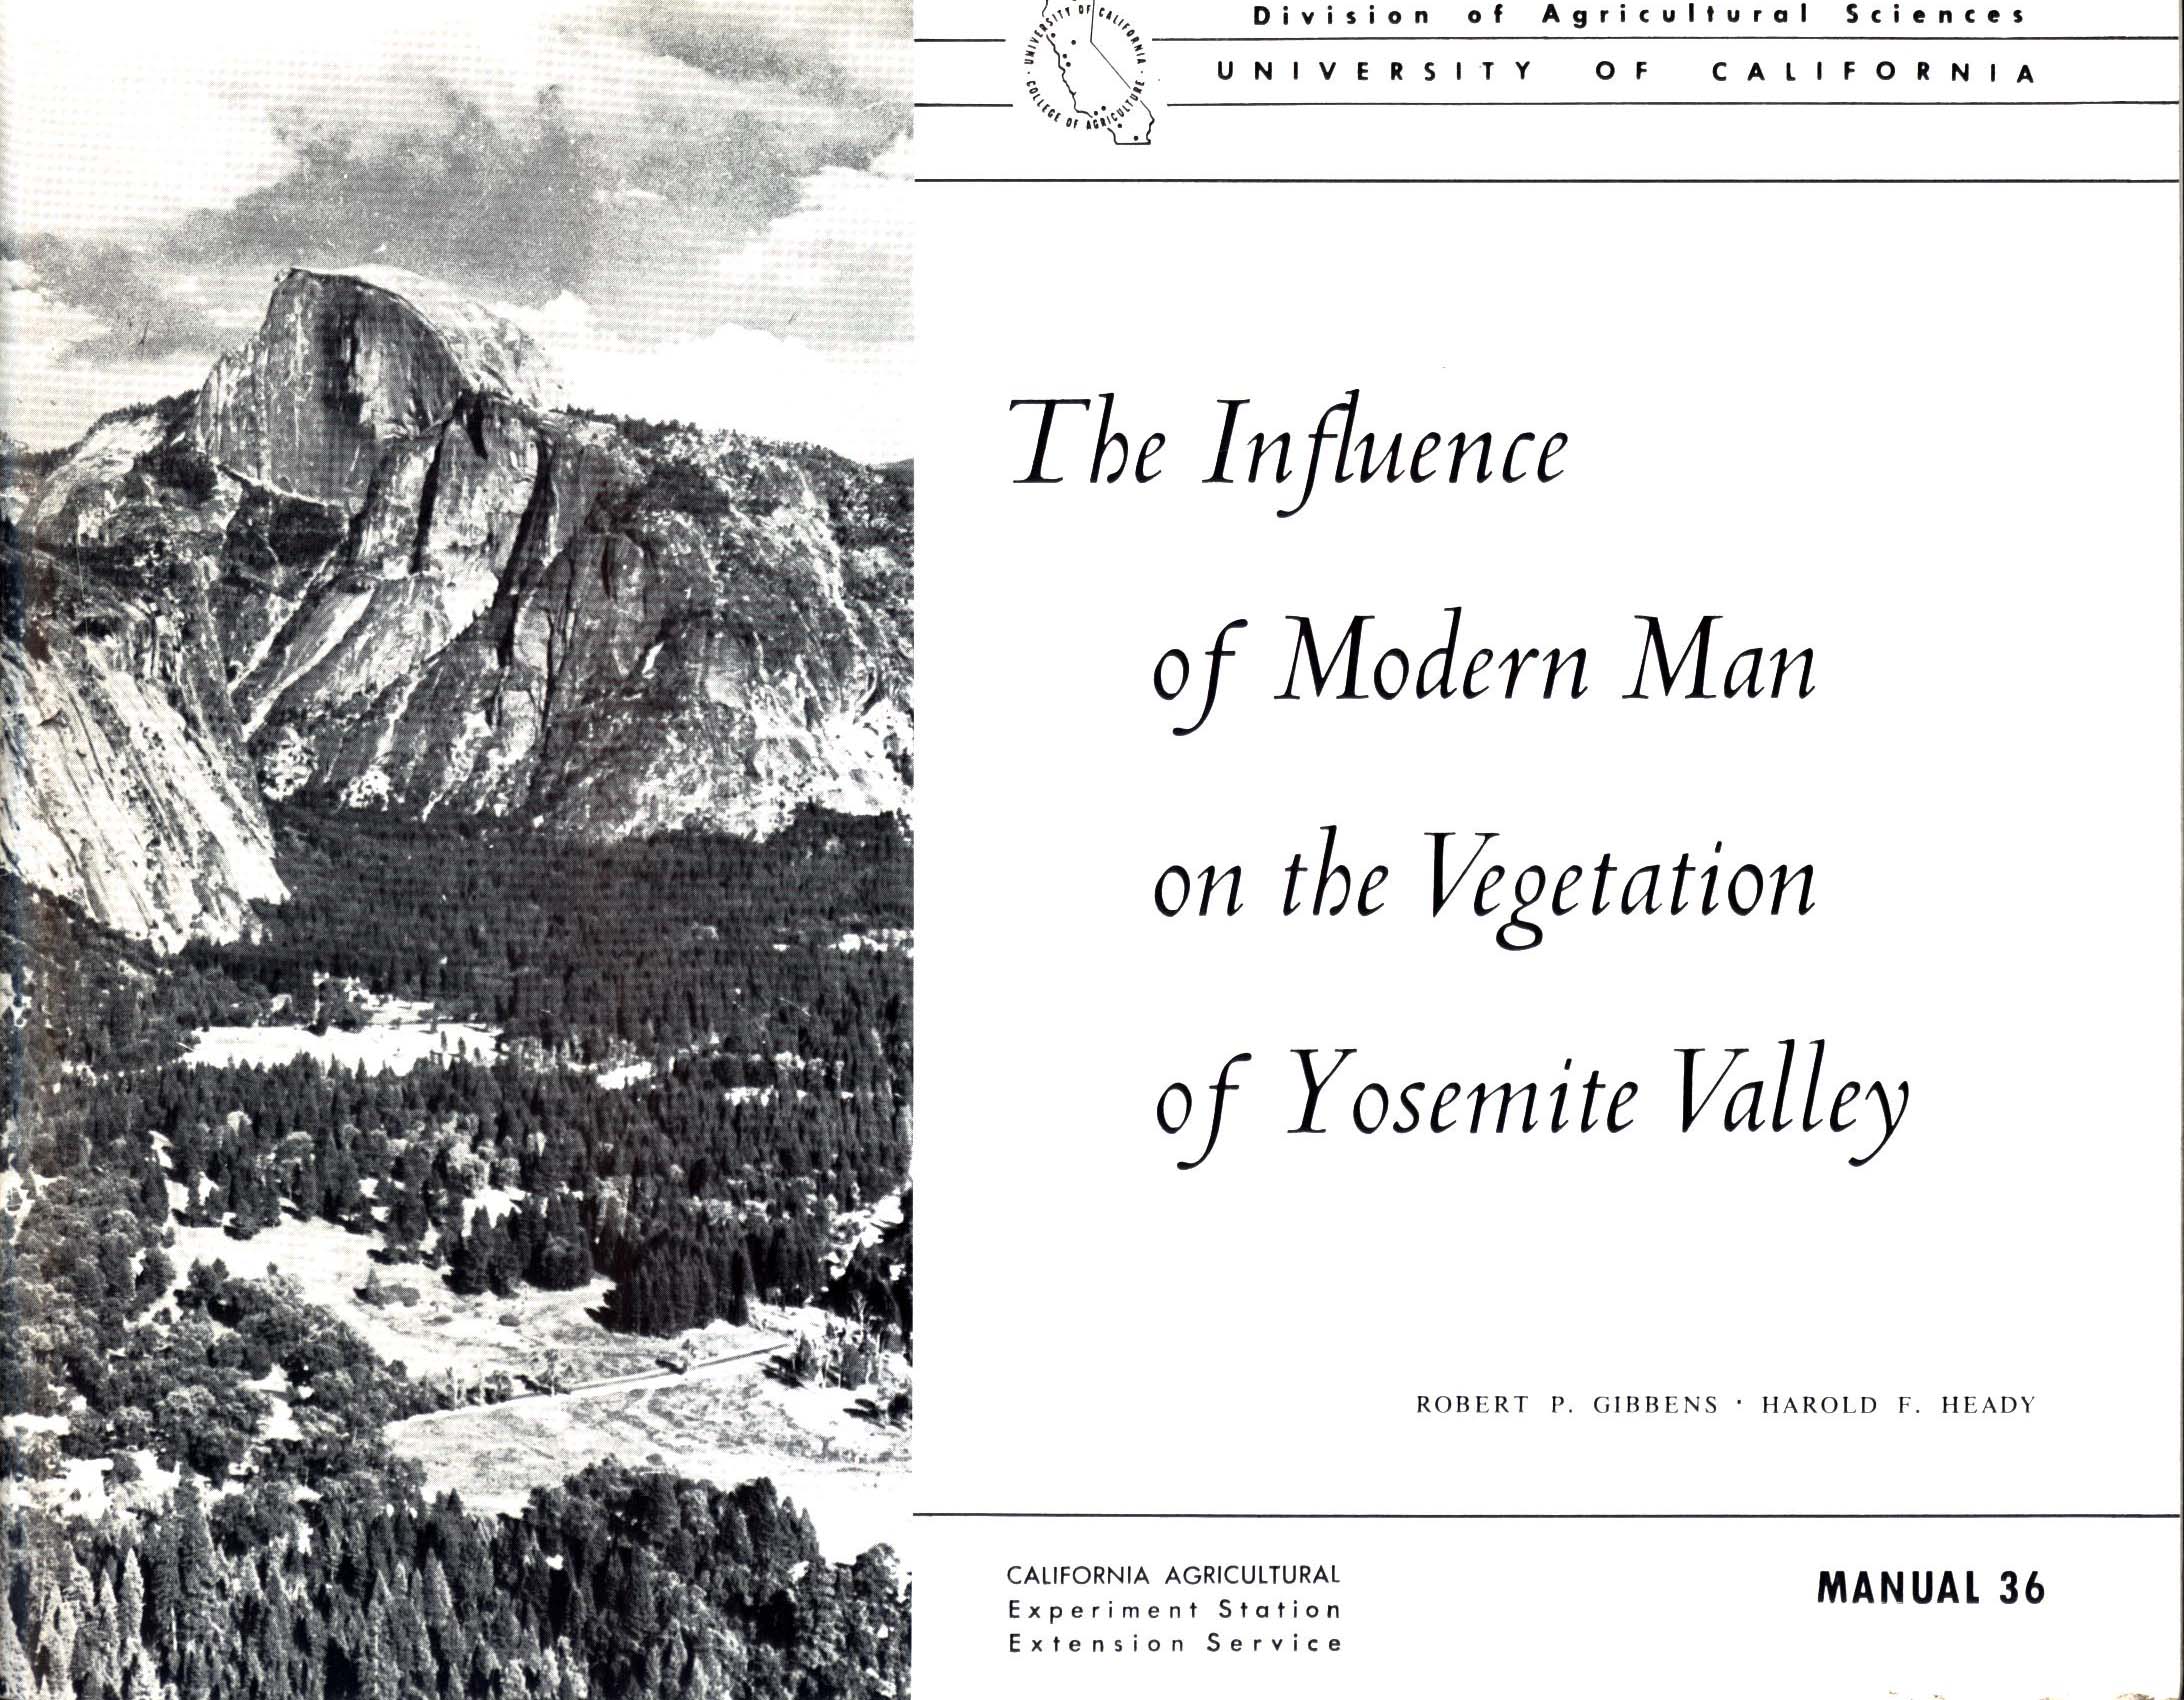 THE INFLUENCE OF MODERN MAN ON THE VEGETATION OF YOSEMITE VALLEY.